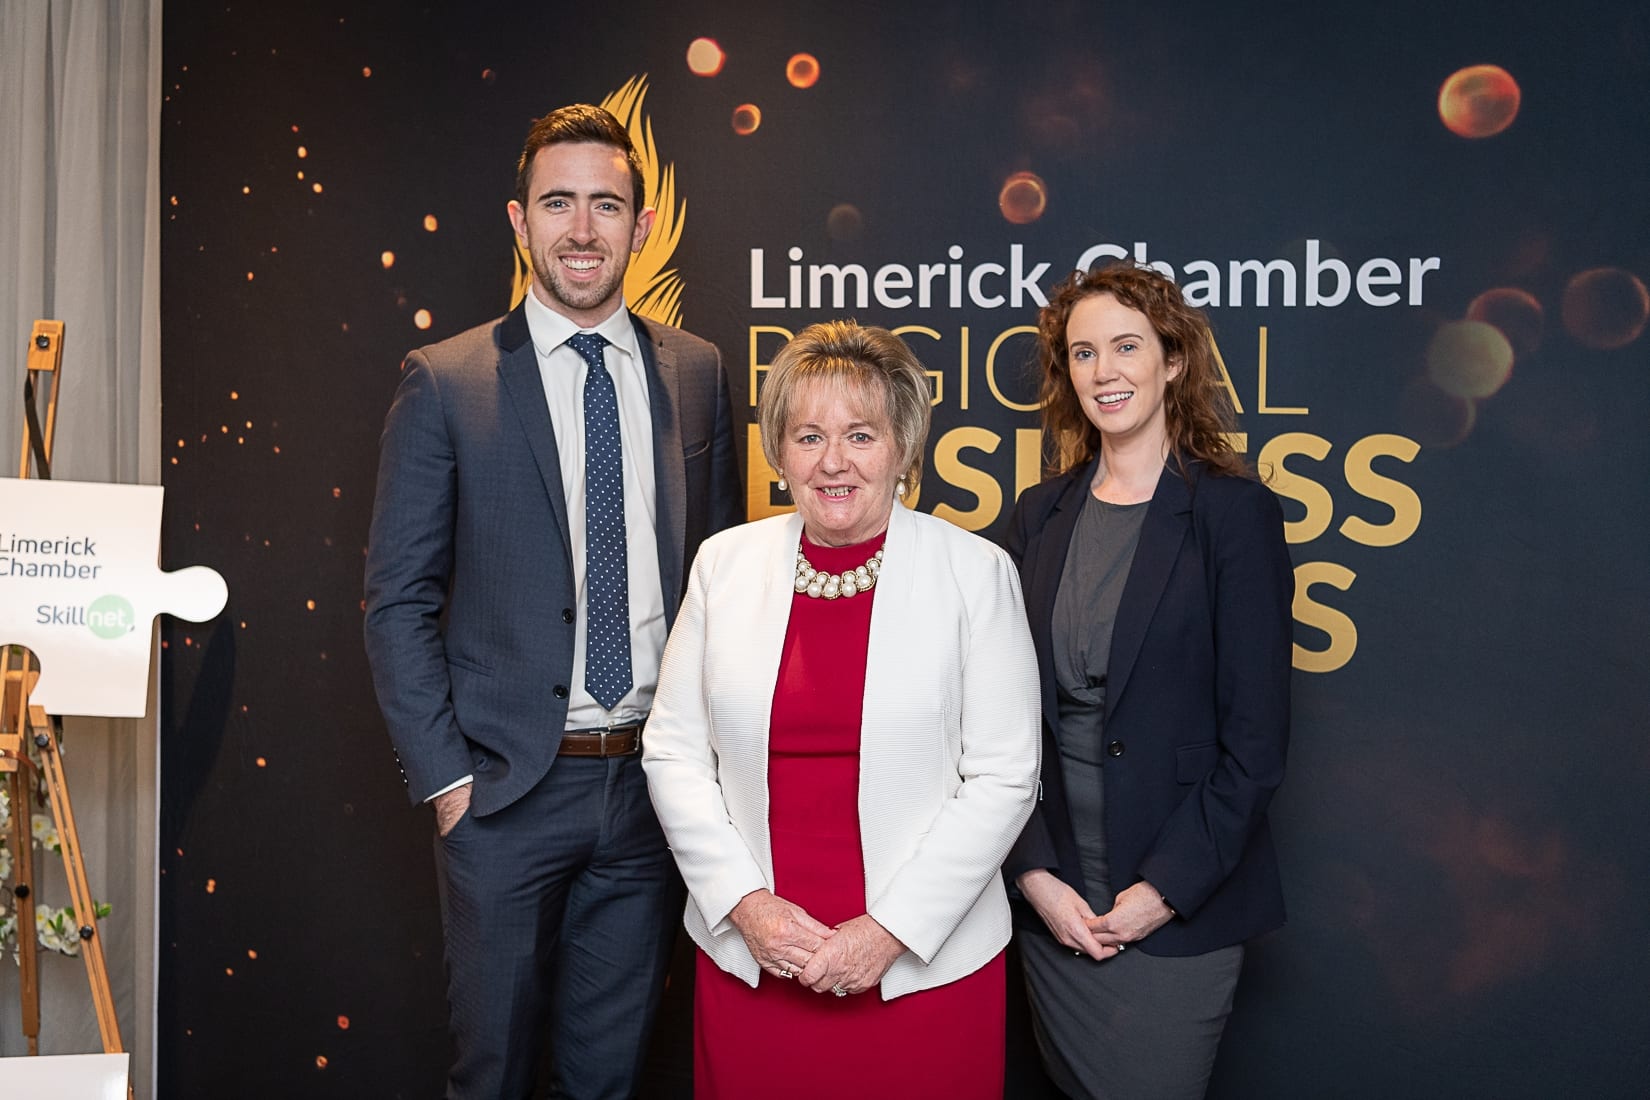 No repro fee-Limerick Chamber President Dinner Shortlist announcement which was held in The Limerick Strand Hotel on Wednesday 16th October  - From Left to Right: Rory Byrne - Deloitte, Yvonne Delaney - UL, Mary McNamee- Limerick Chamber. 
Photo credit Shauna Kennedy